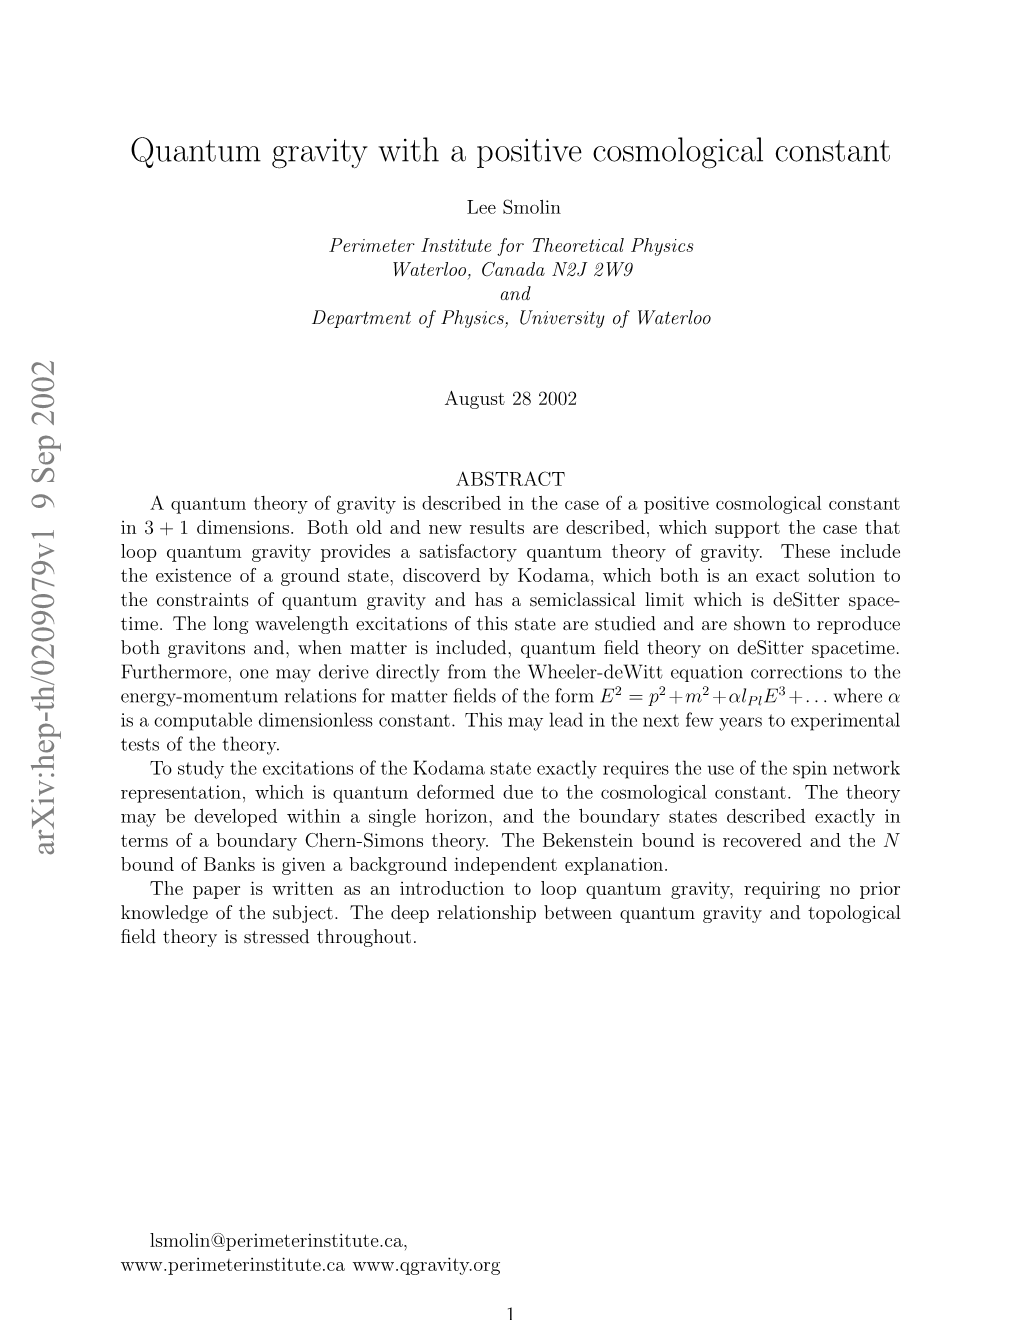 Quantum Gravity with a Positive Cosmological Constant